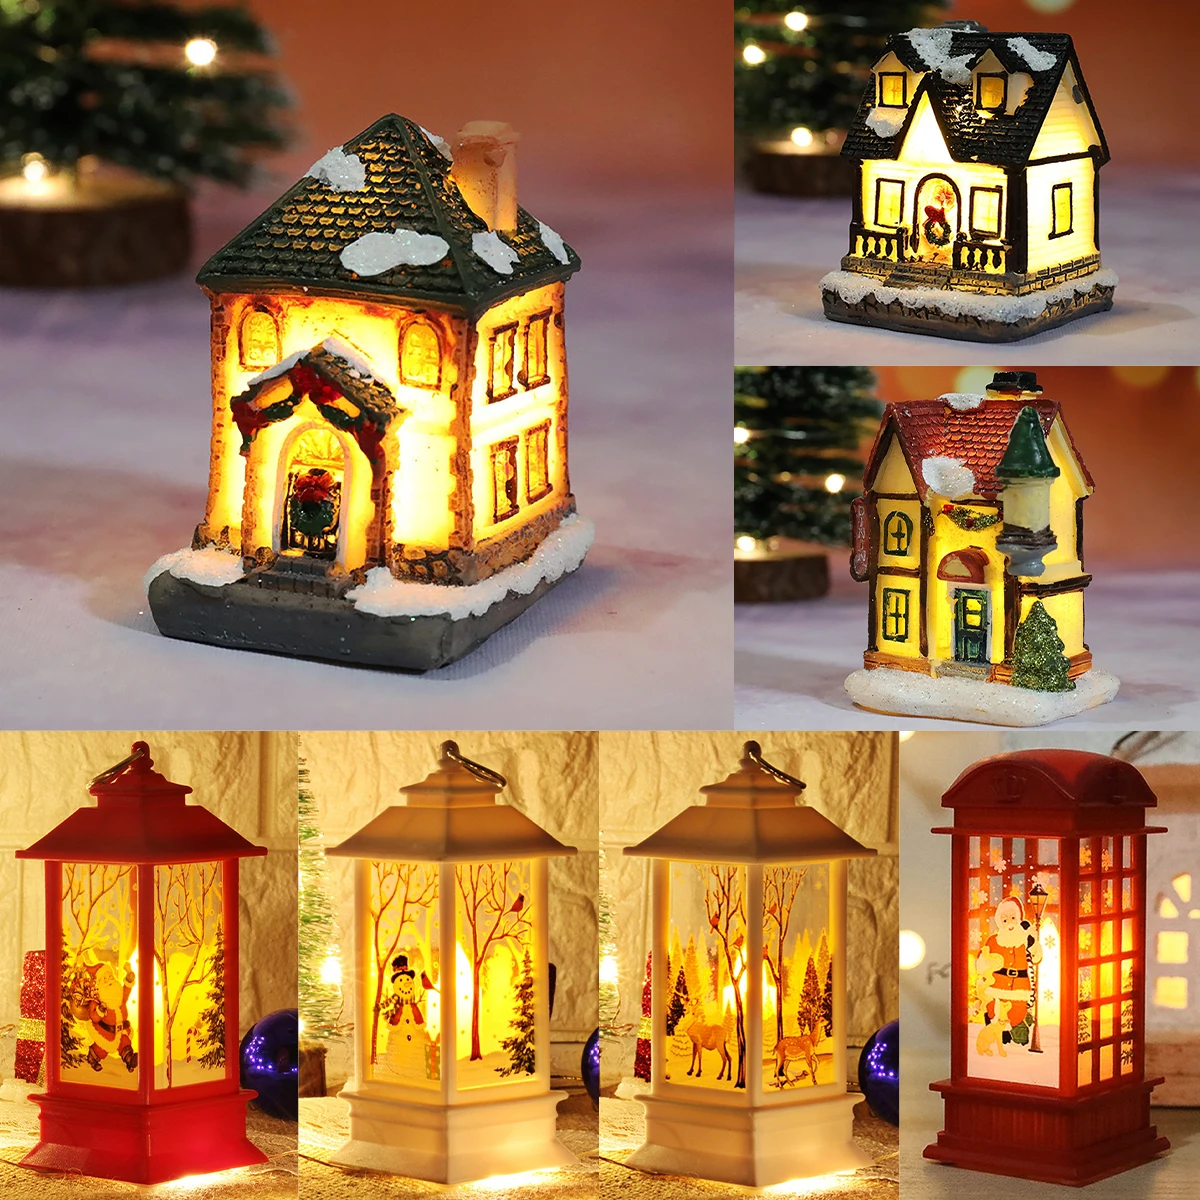 

Christmas Light House Merry Christmas Decorations For Home Xmas Gifts Cristmas Ornaments New Year 2022 Natale Navidad Noel Decor